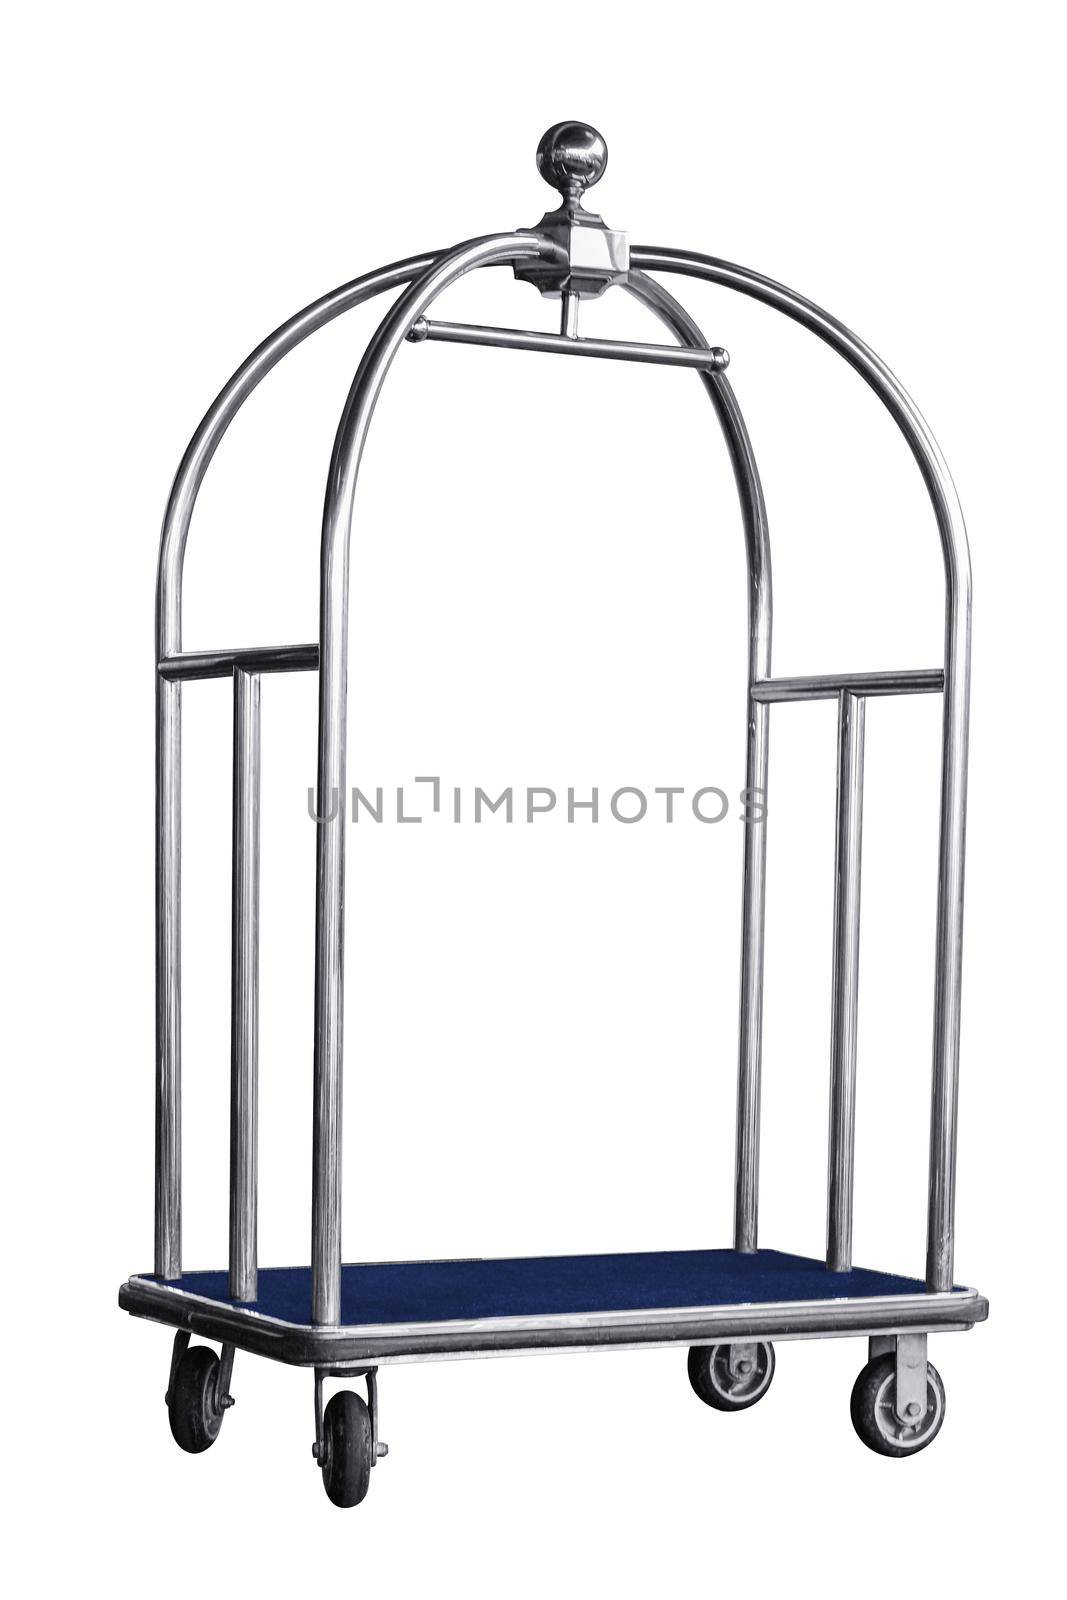 Stainless steel luxury trolley bag, hotel baggage cart isolated on white background work with clipping path.